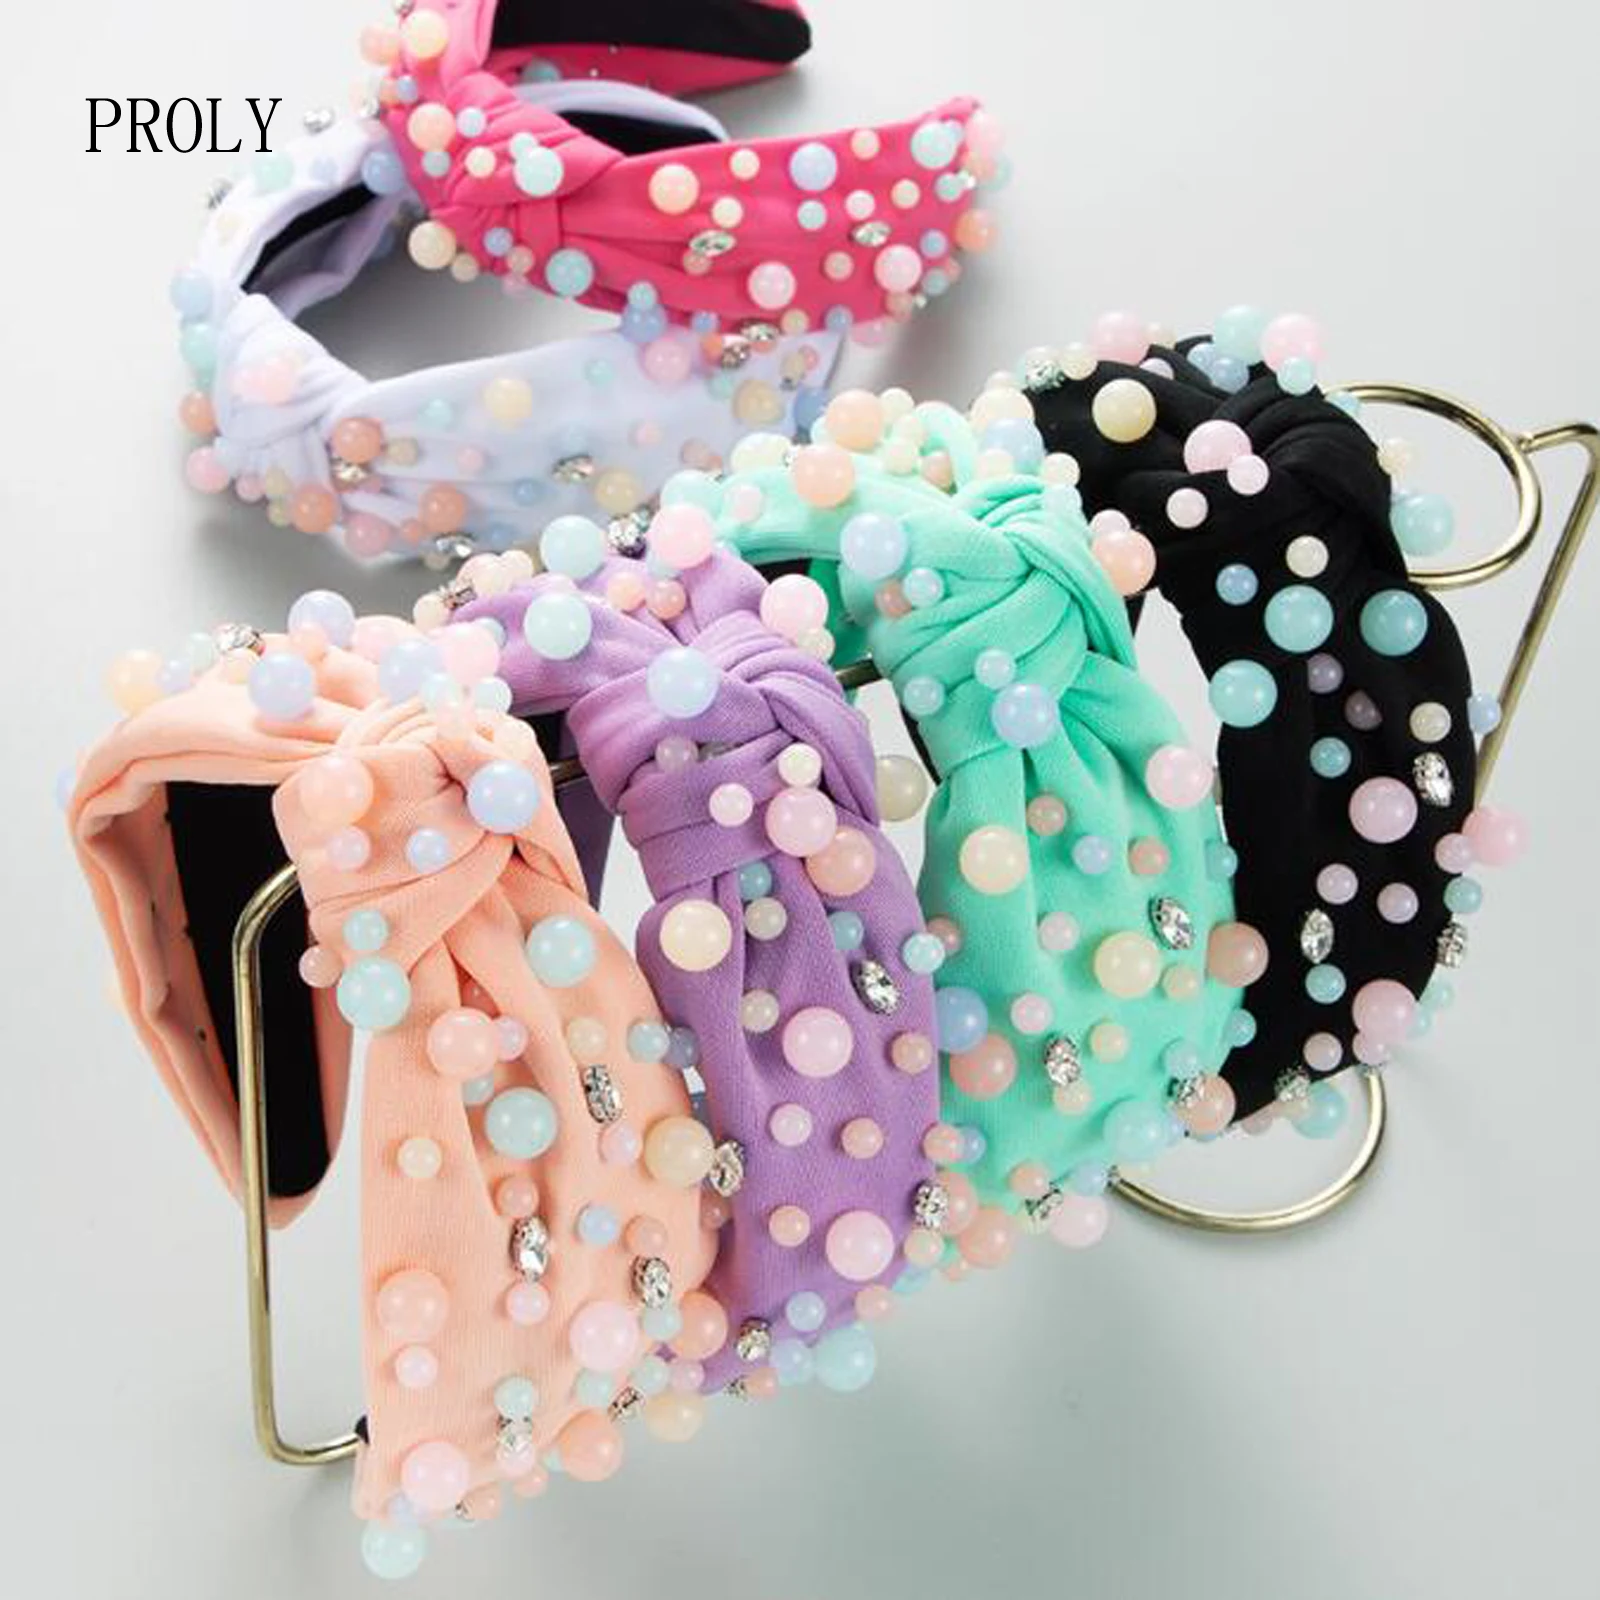 

PROLY New Fashion Headband For Women Center Knot Colorful Pearls Hairband Top Quality Turban Girls Hair Accessories Wholesale